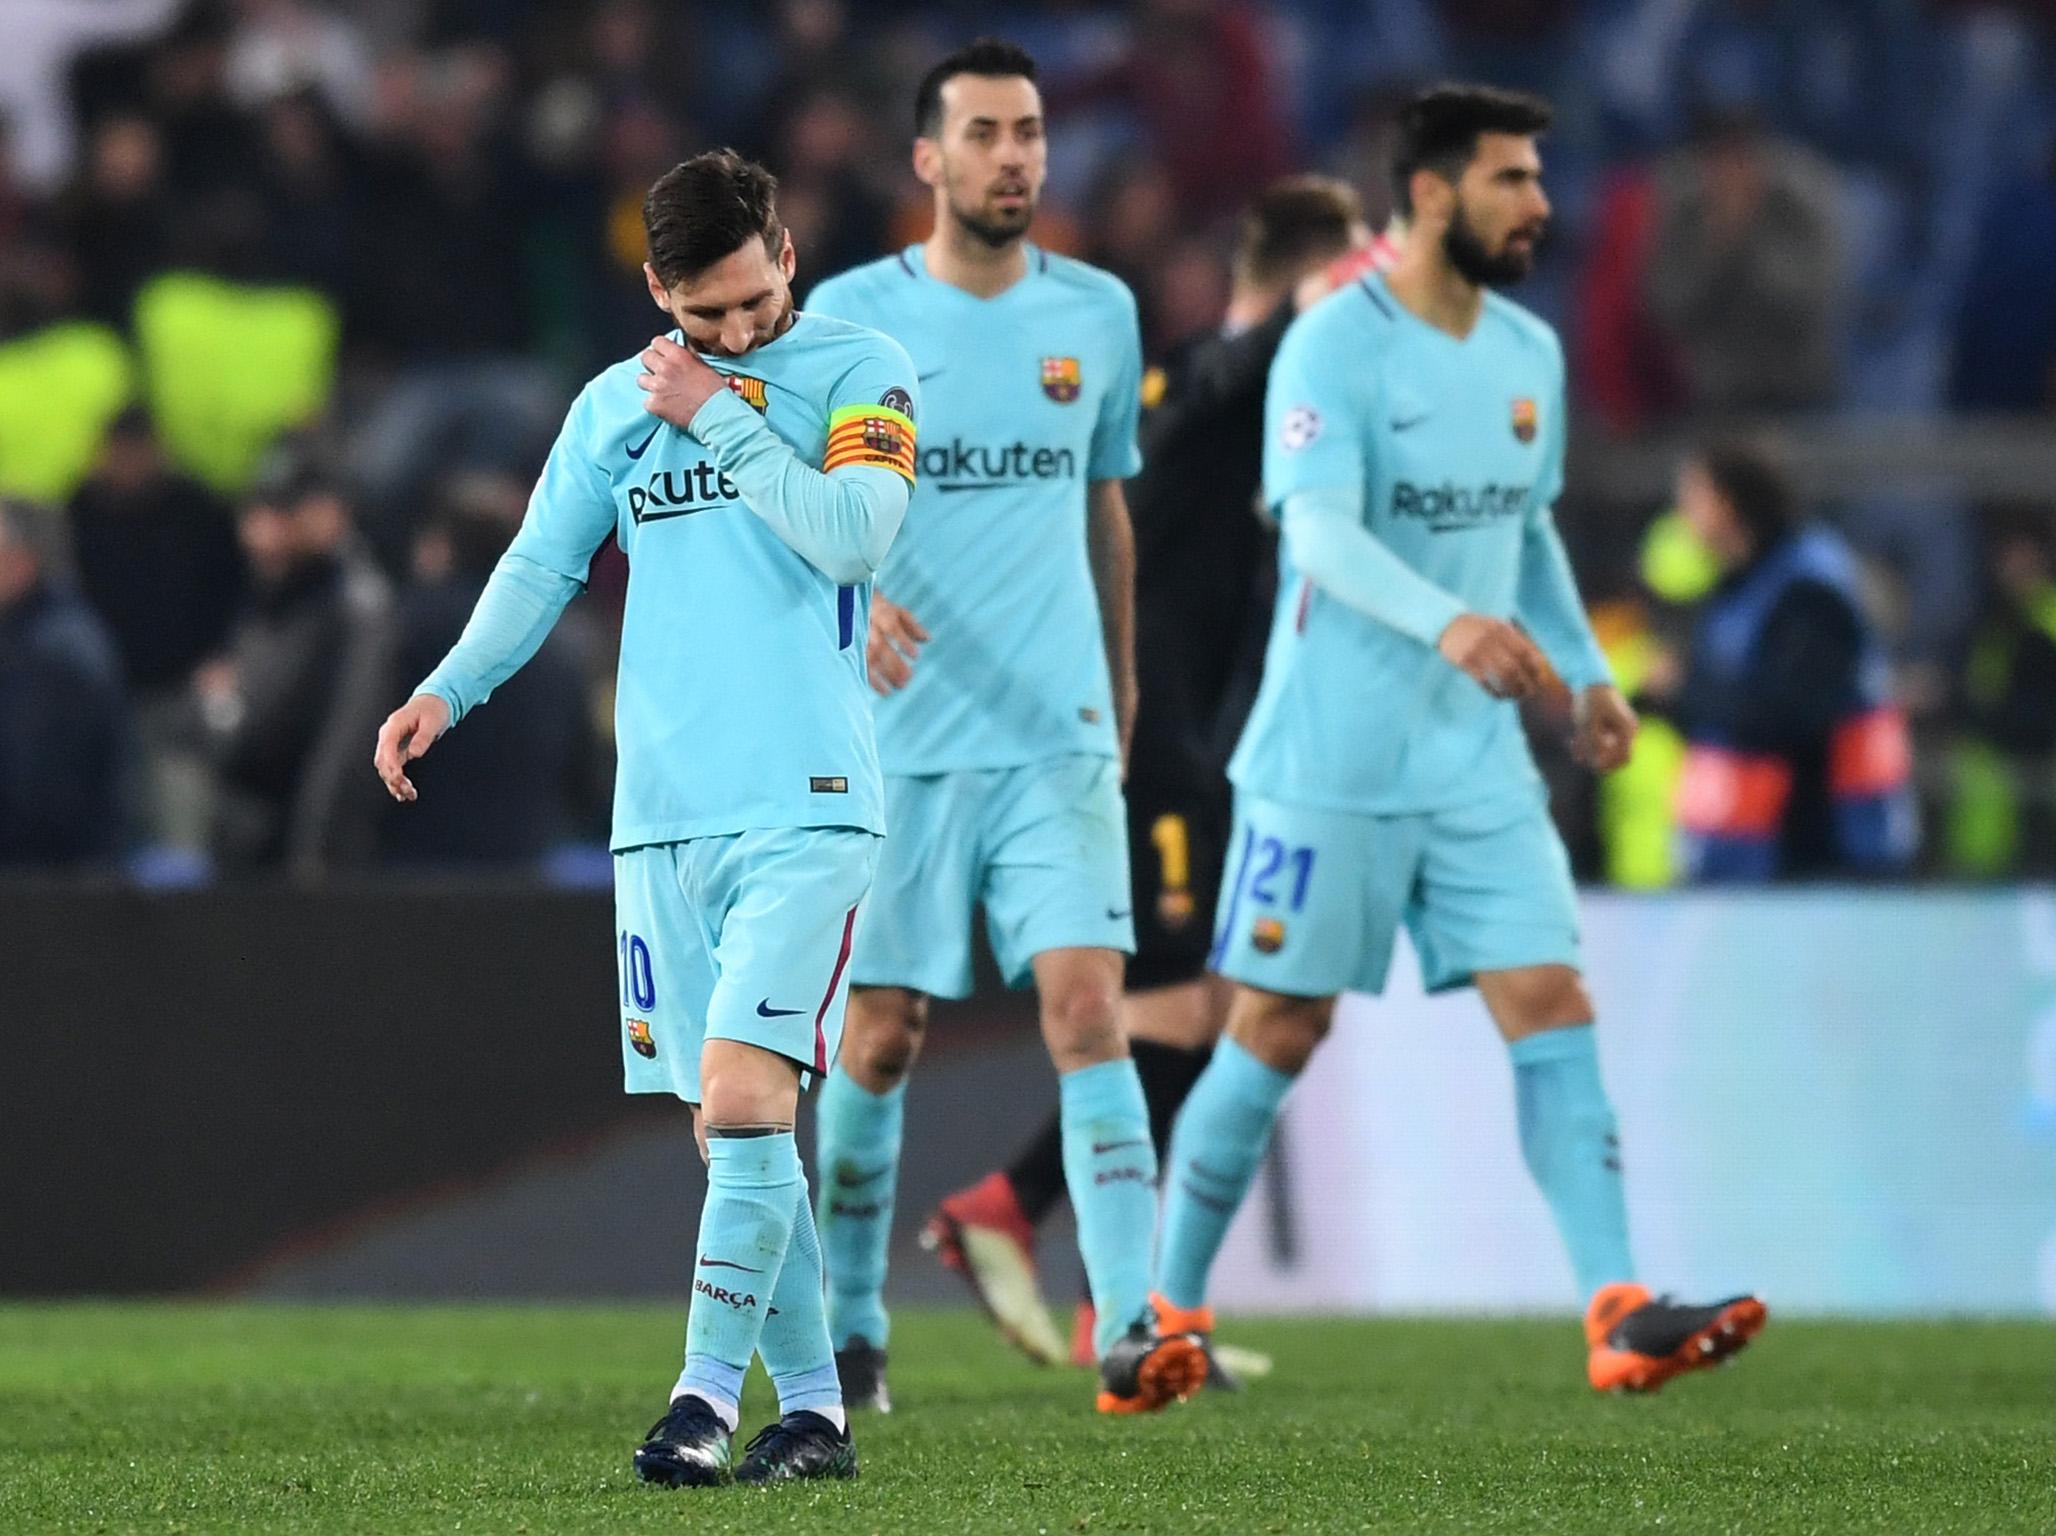 It was a torrid night for Barcelona in Rome